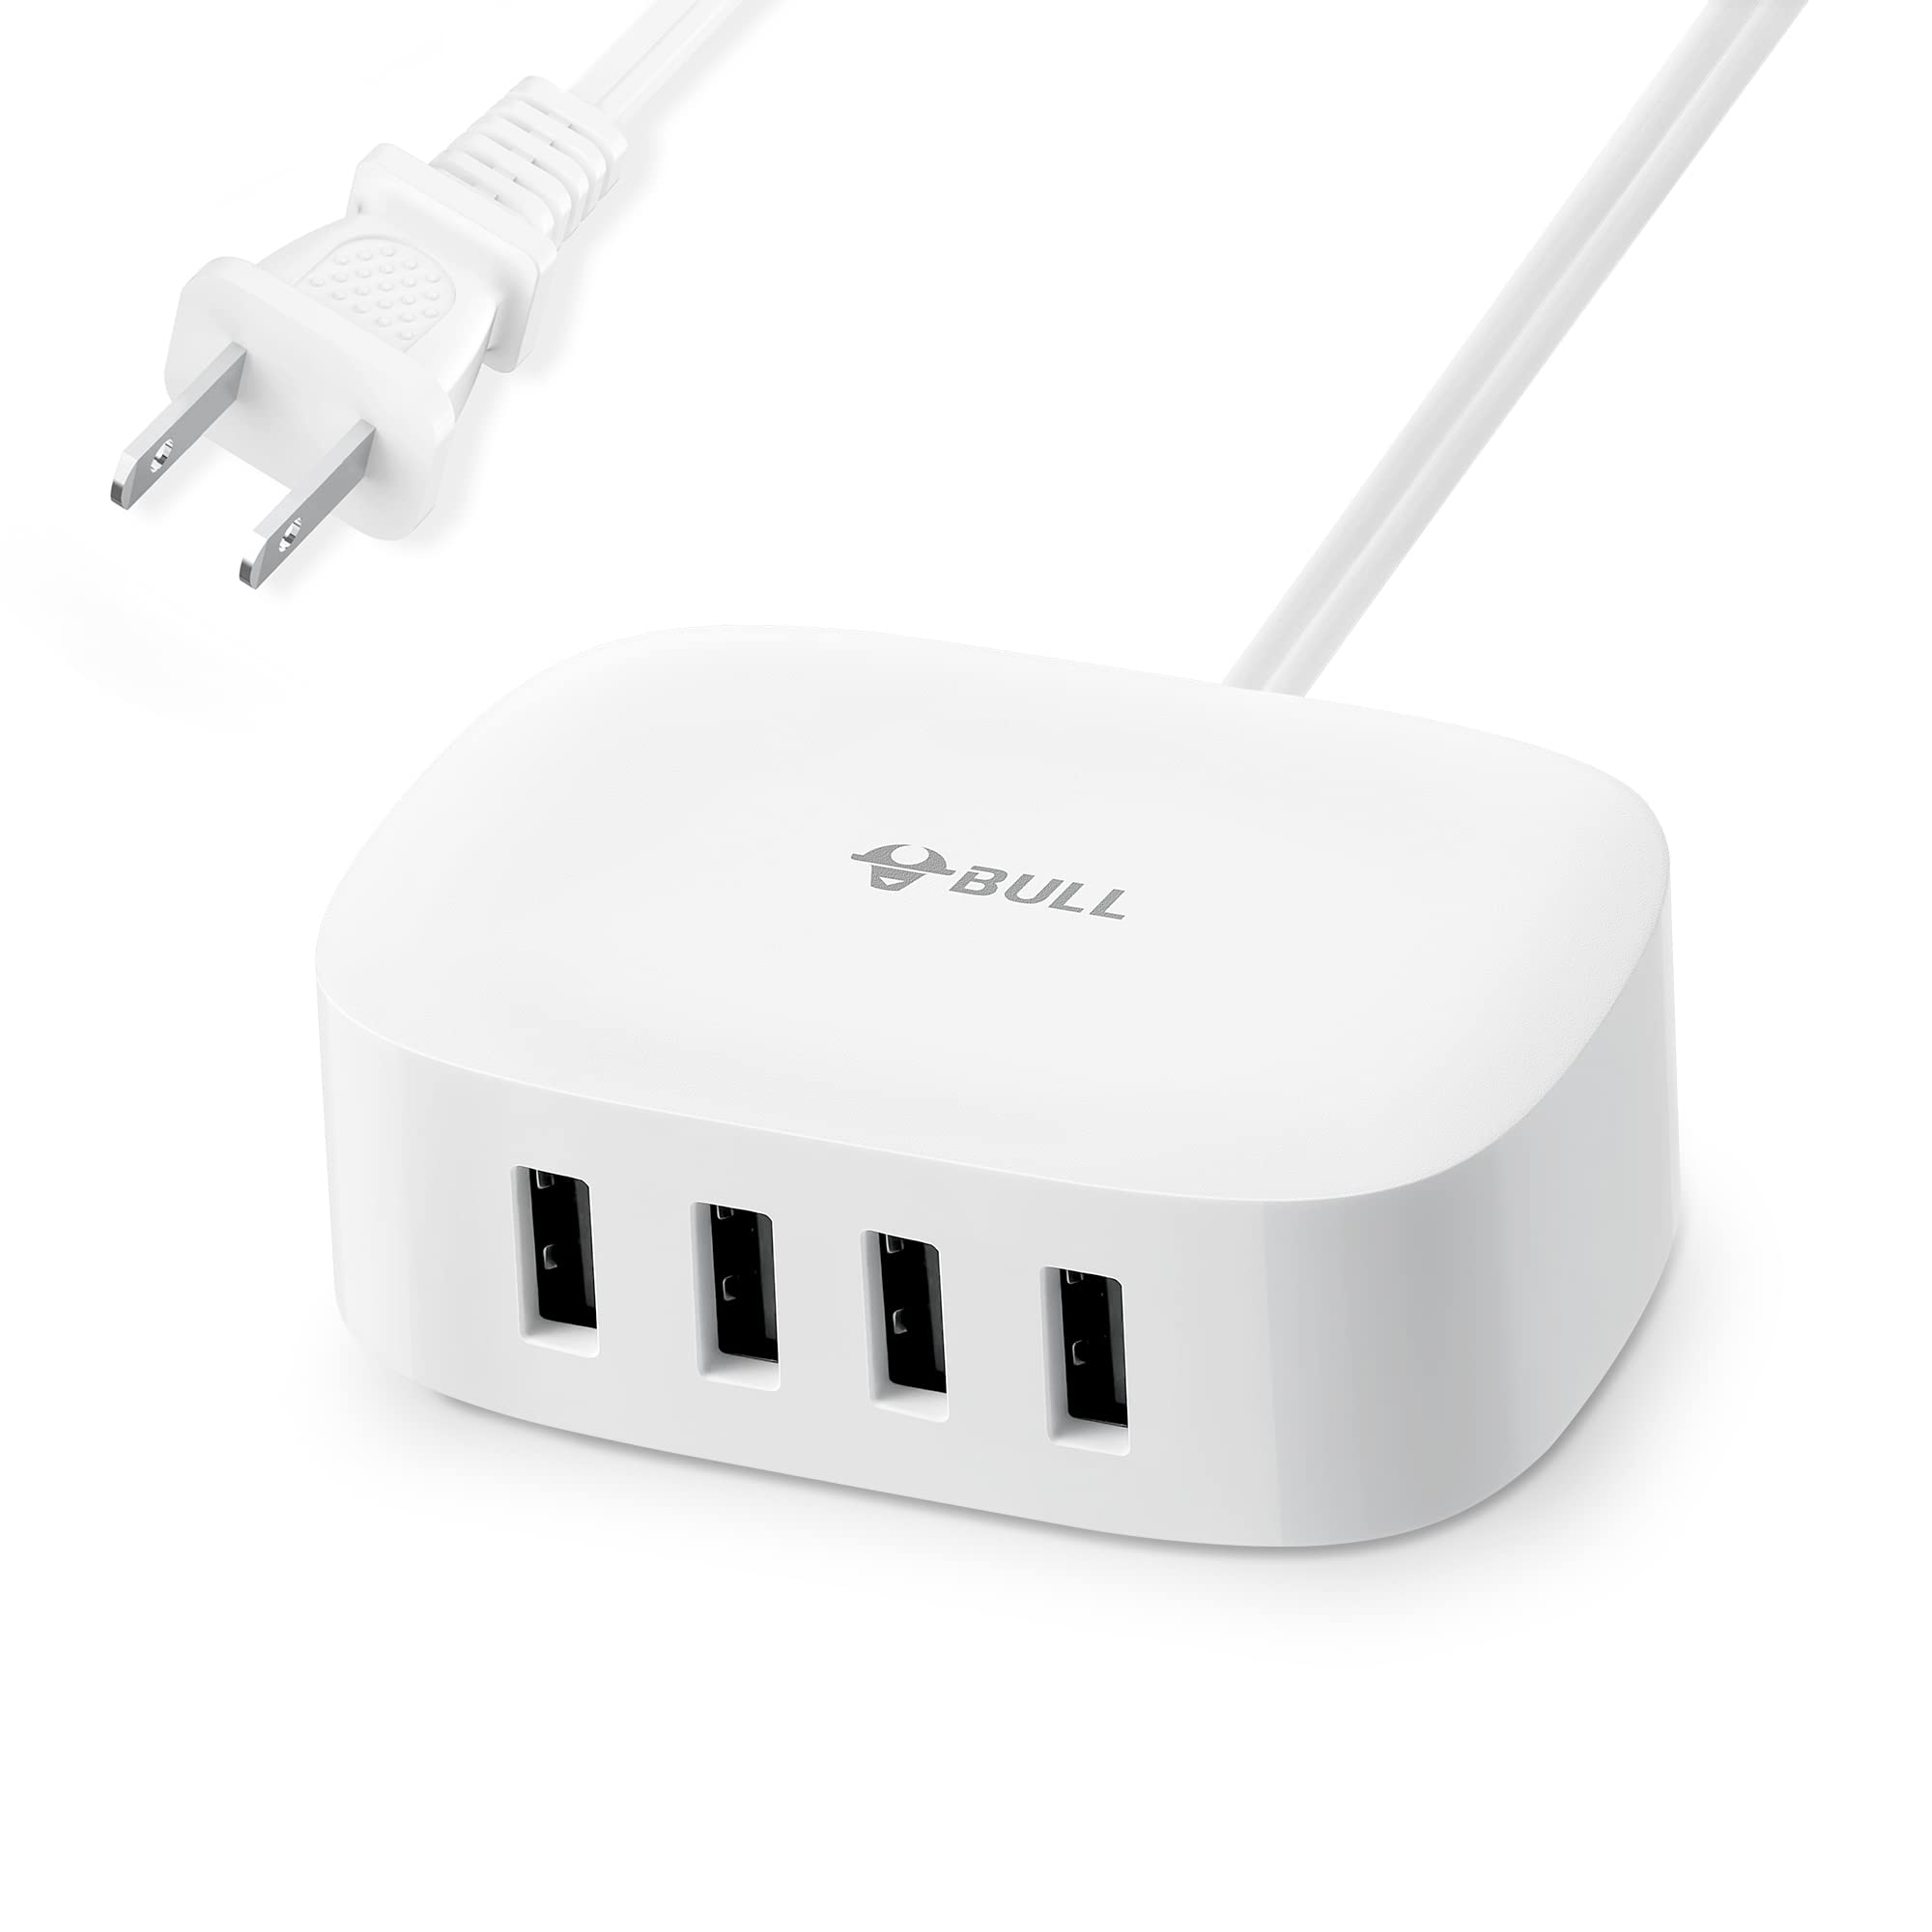 BULL USB Charging Station 4 in 1 USB Charger with 6ft Extension Cord for Apple iPhone, Samsung, Tablet - Smart Tech Shopping